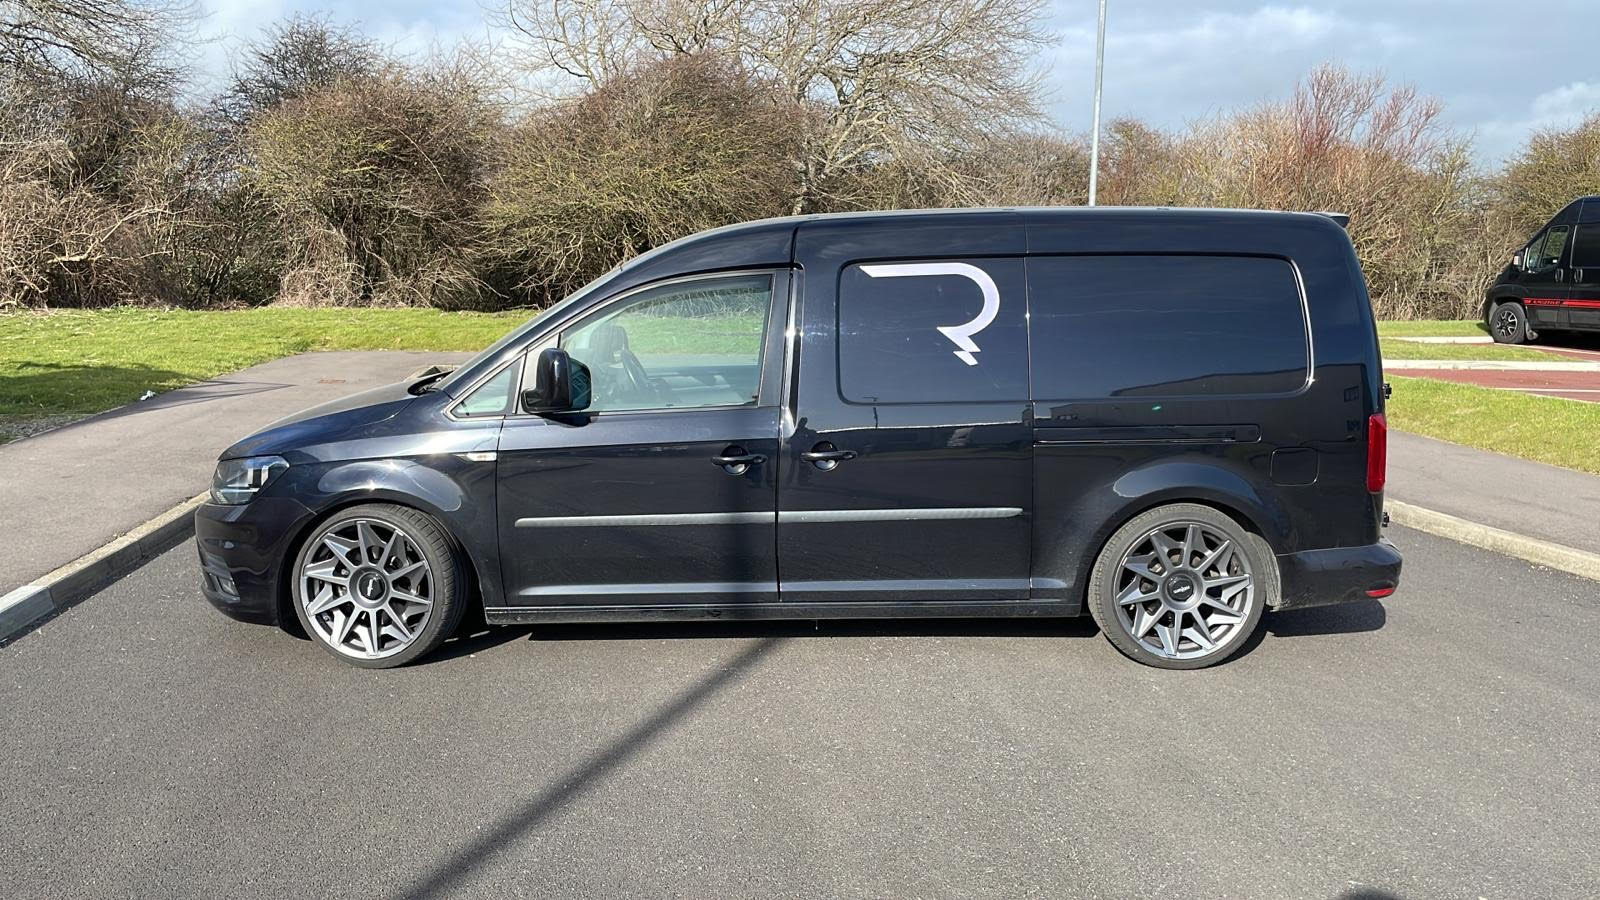 https://www.lovecampers.co.uk/wp-content/uploads/2022/02/BLACK-LOWERED-VW-CADDY-FOR-SALE.jpg